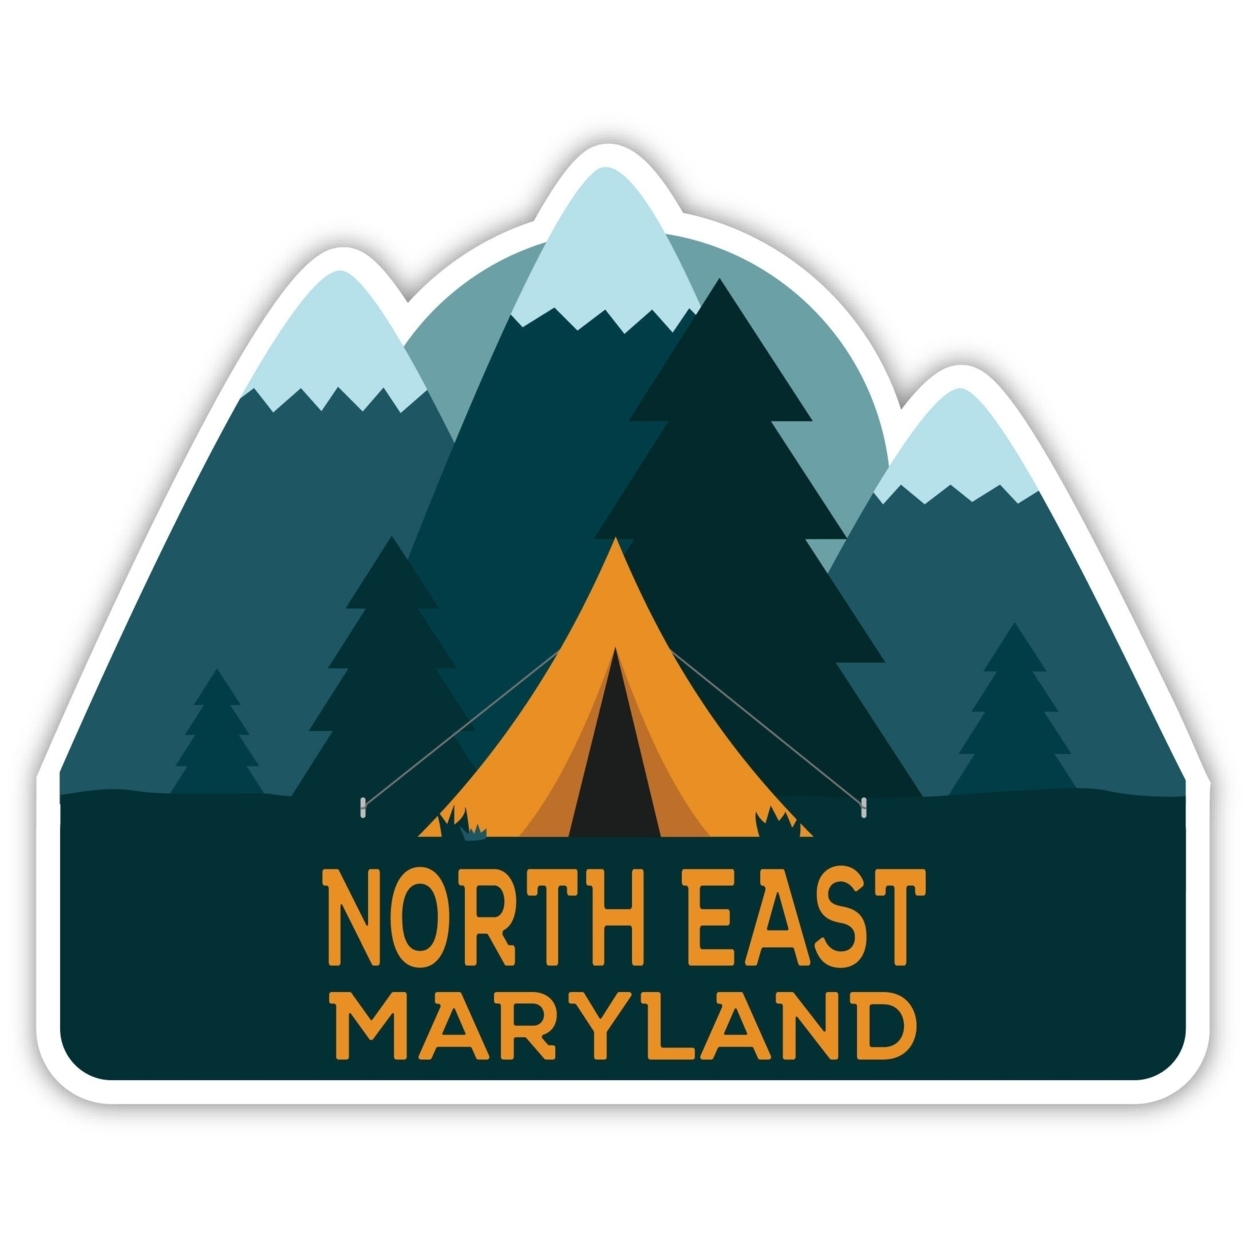 North East Maryland Souvenir Decorative Stickers (Choose Theme And Size) - Single Unit, 2-Inch, Tent